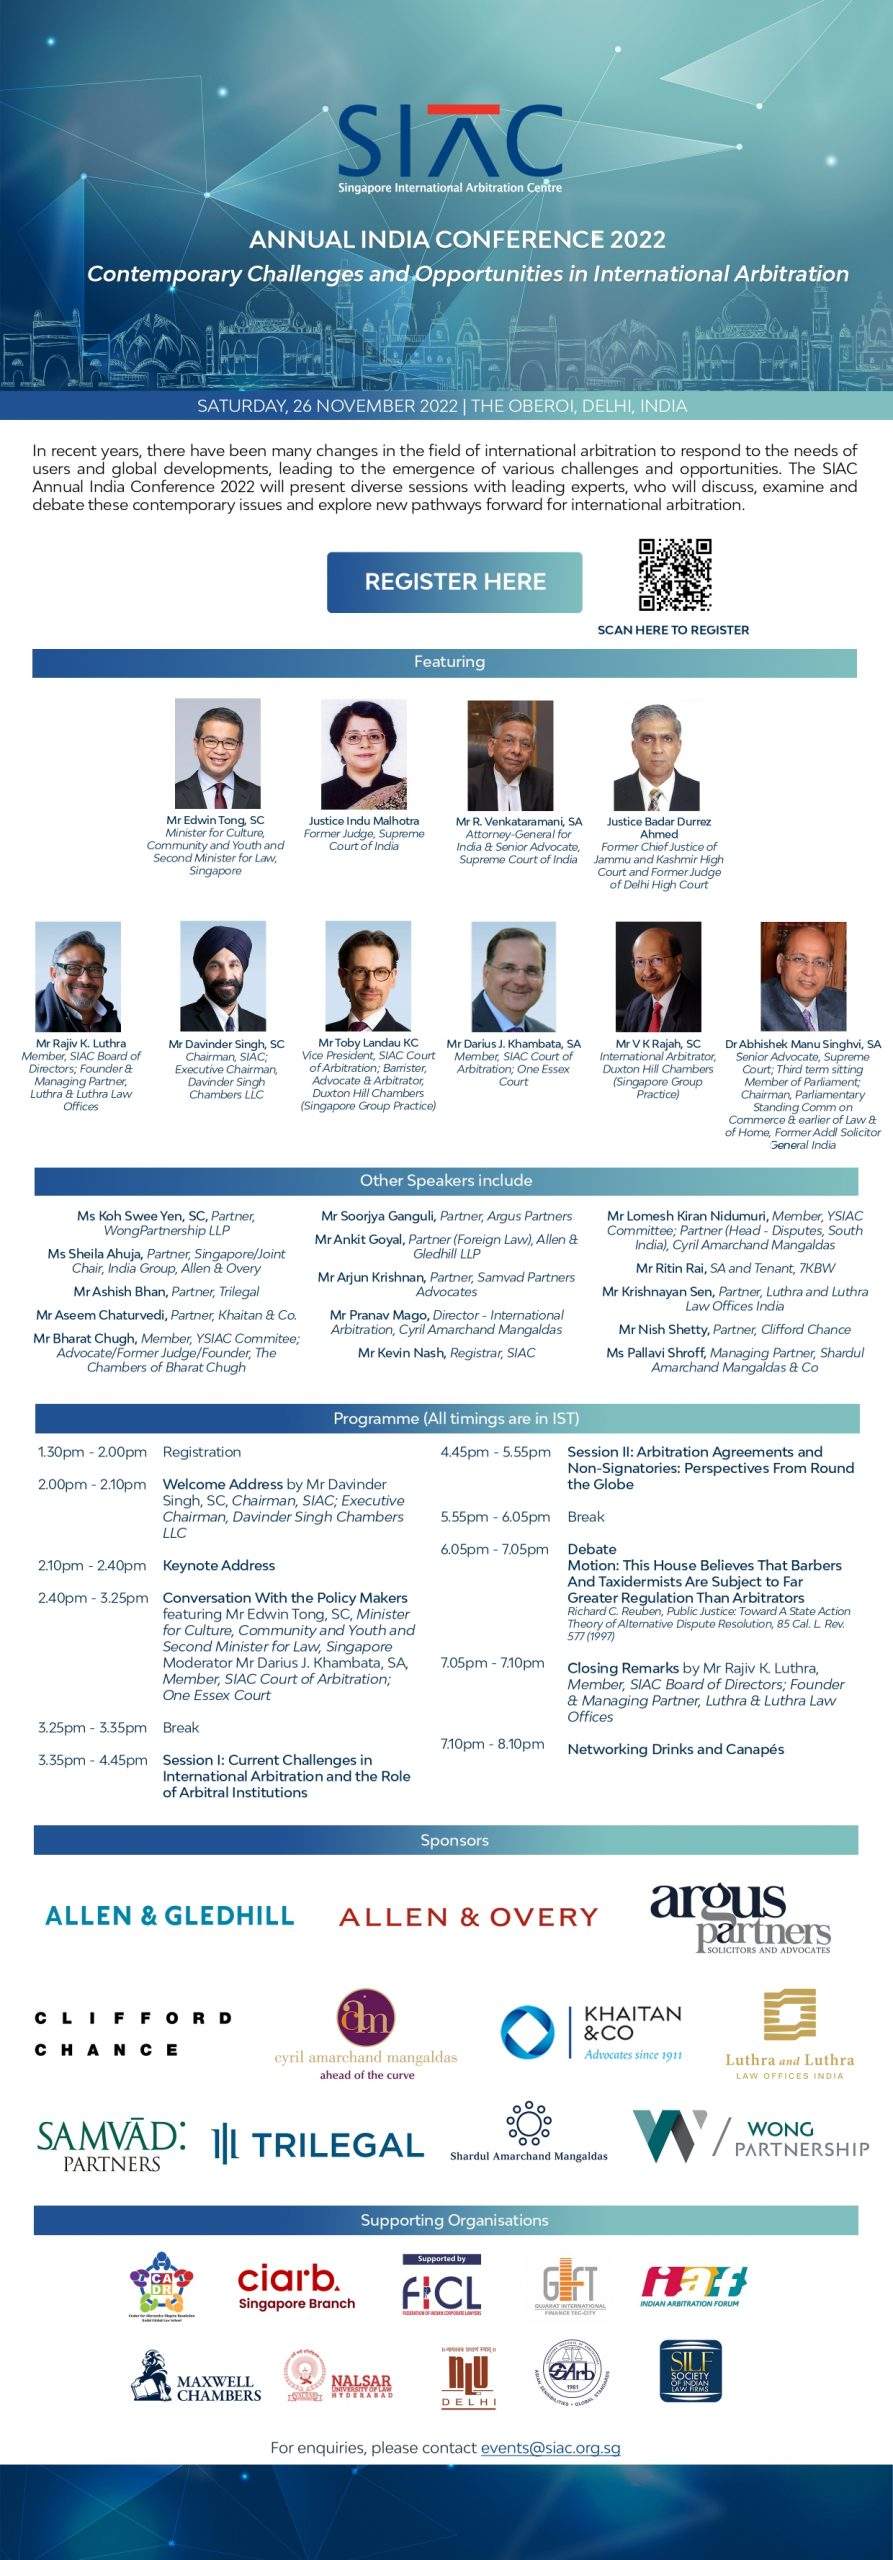 SIAC Annual India Conference 2022 Flyer